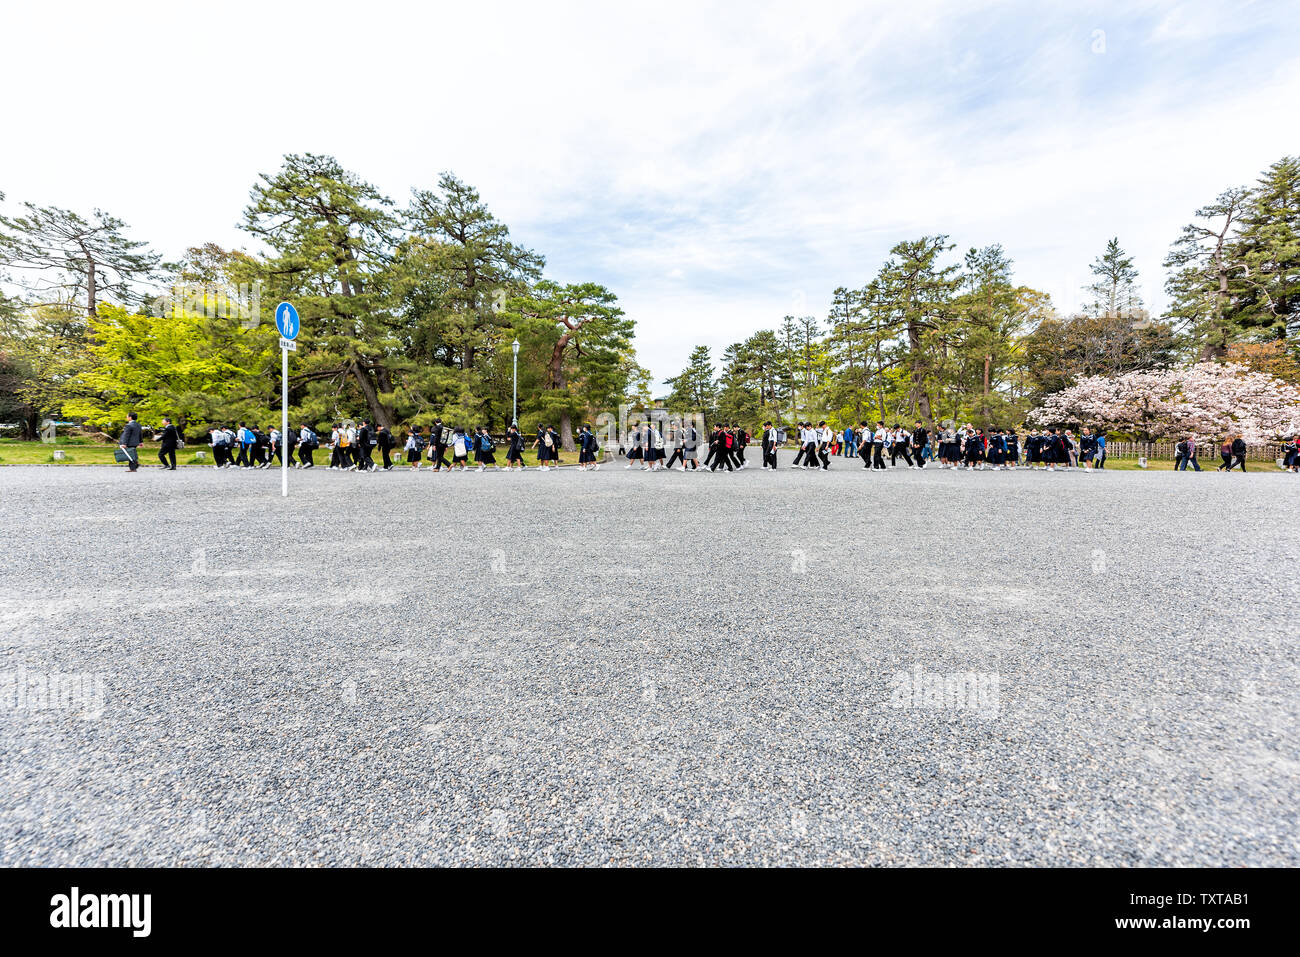 Kyoto, Japan - April 17, 2019: Road with many people school children boys and girls walking in line on gravel street near Imperial Palace on field tri Stock Photo